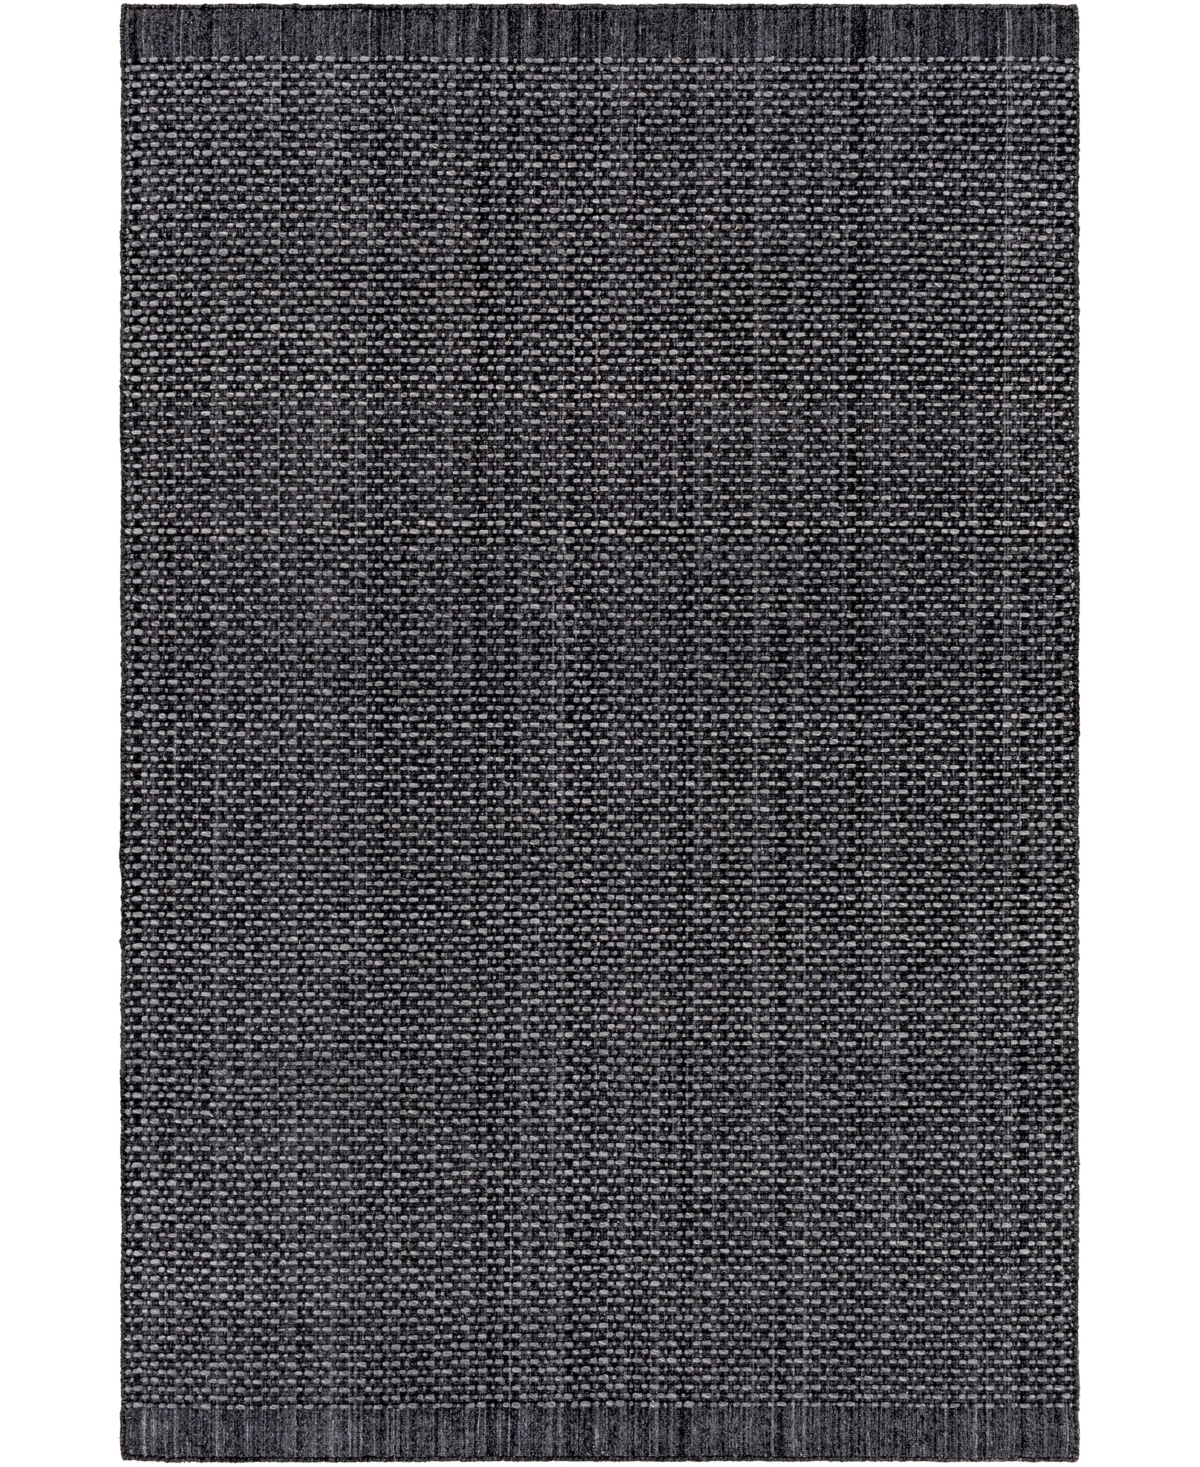 Surya Sycamore Syc-2302 5in x 7'6in Outdoor Area Rug - Charcoal